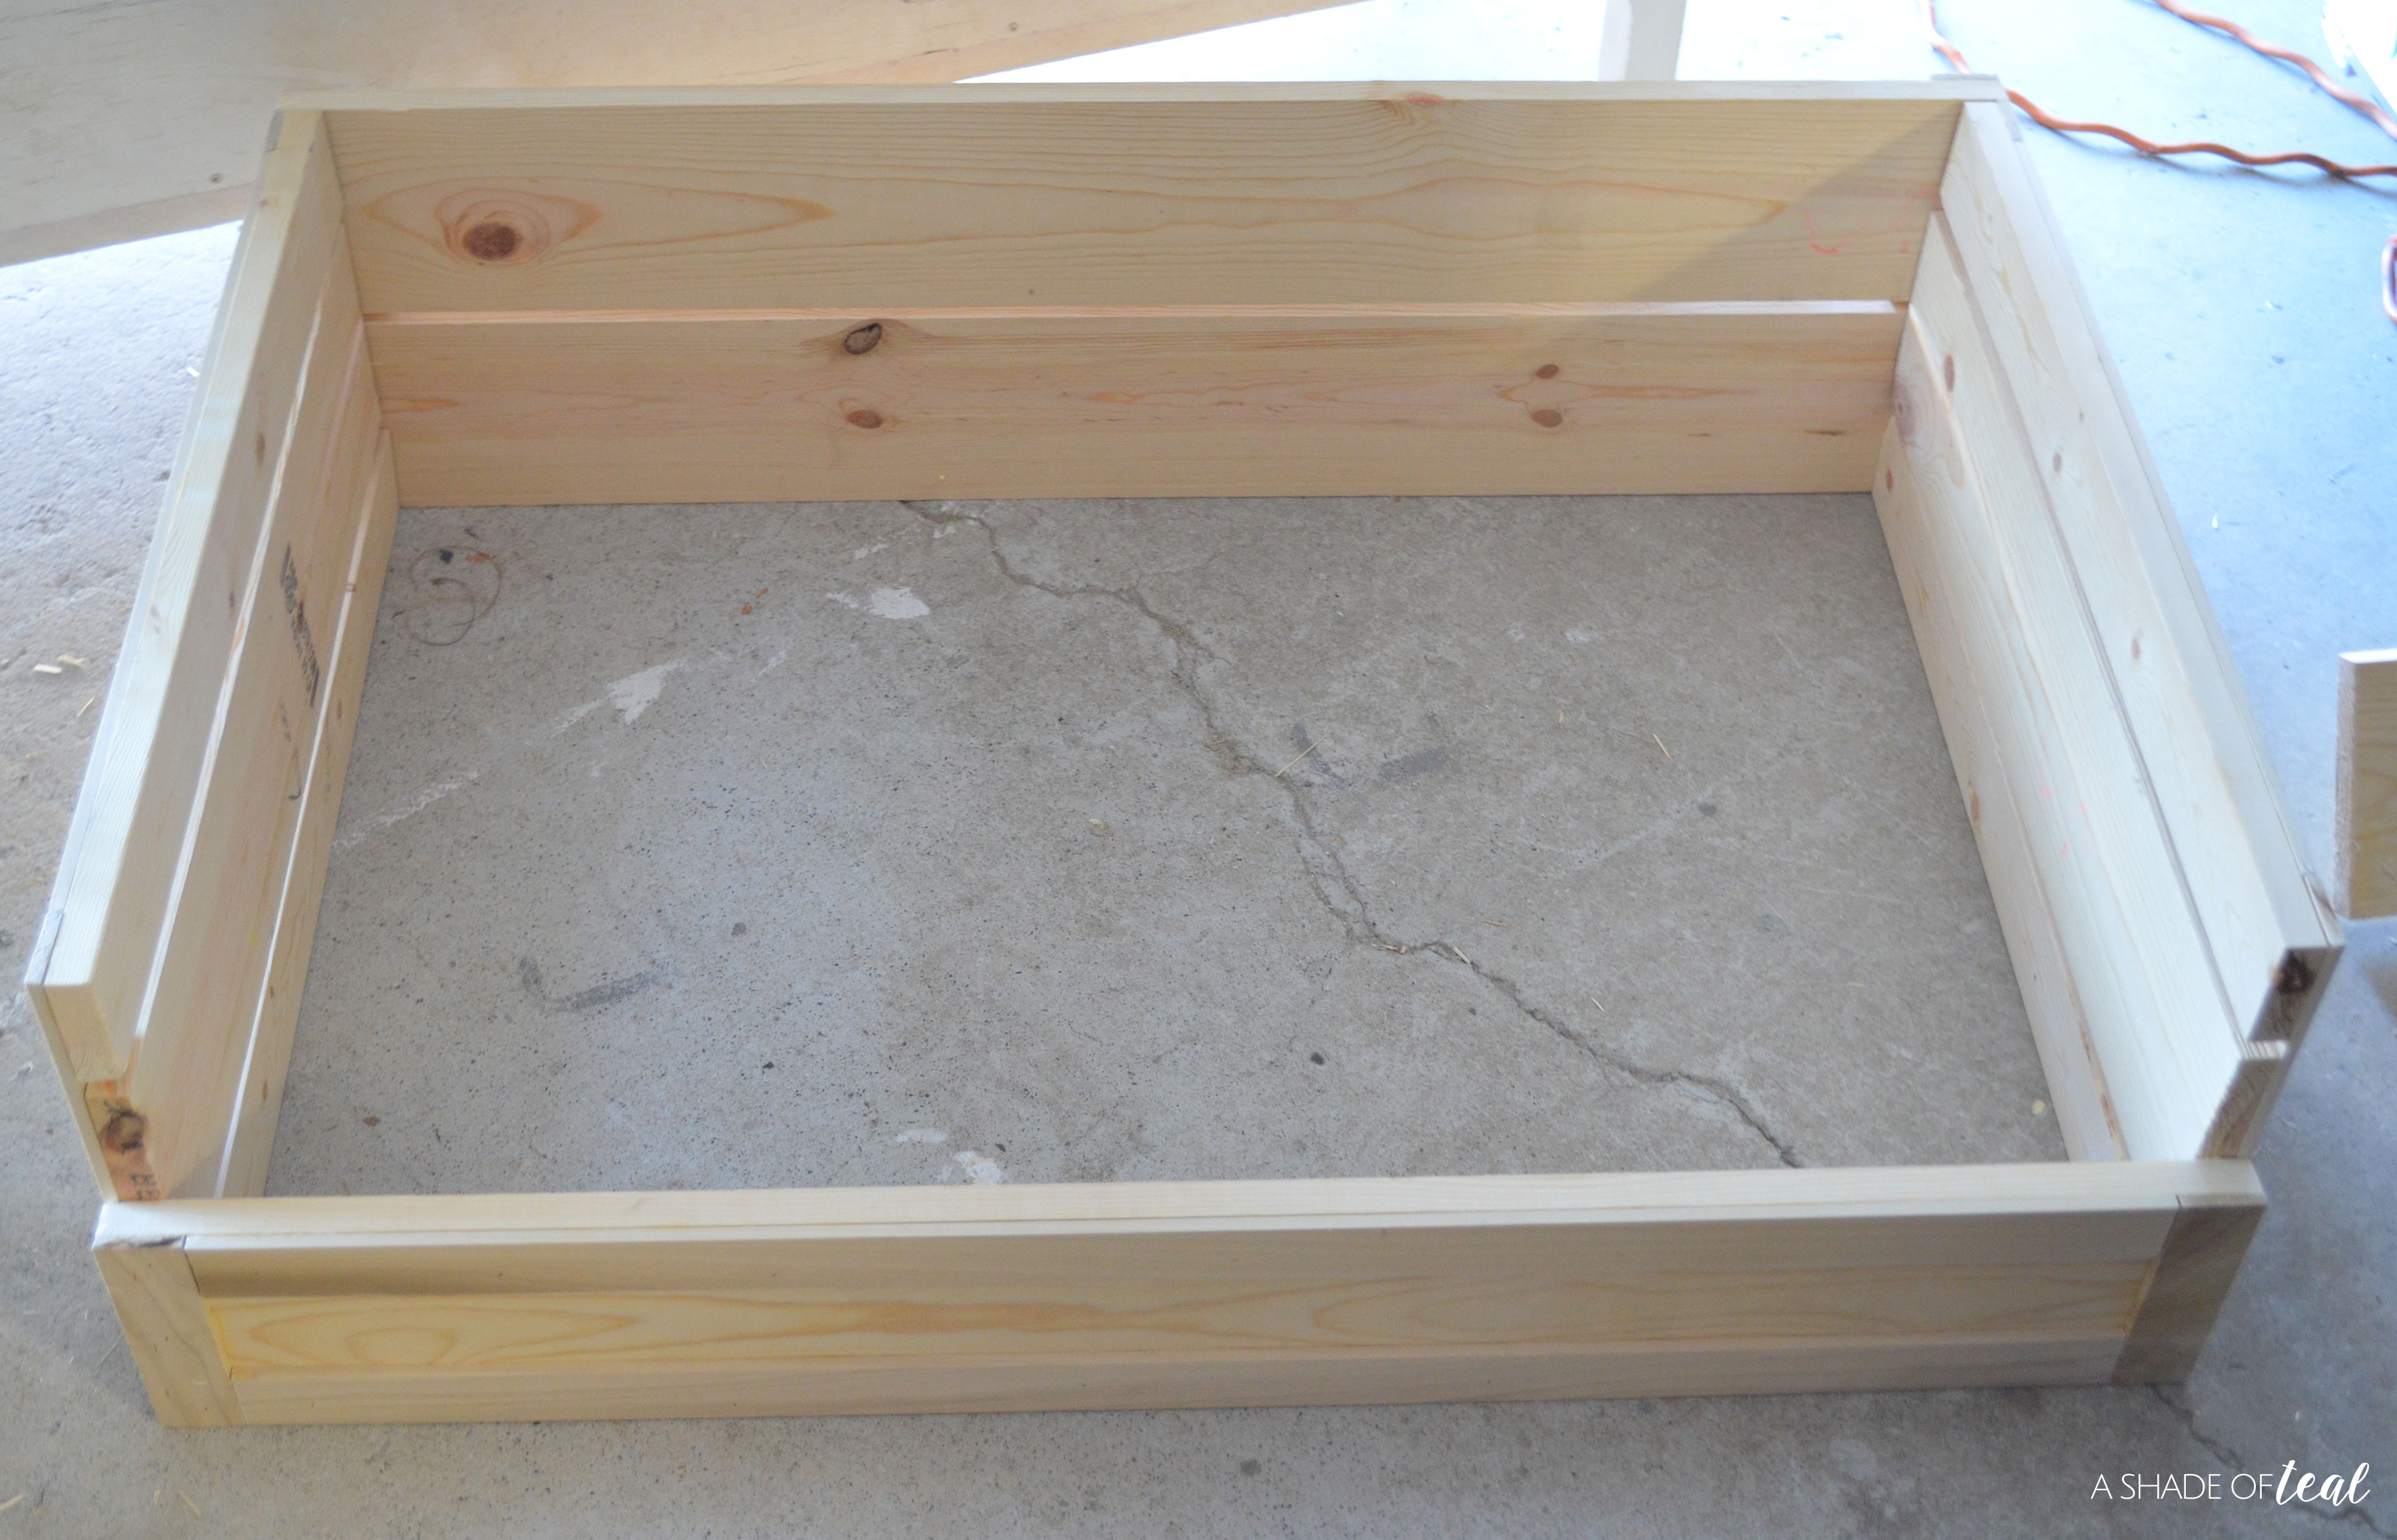 How To Build A Rustic Wood Dog Bed, How To Build A Dog Bed Frame